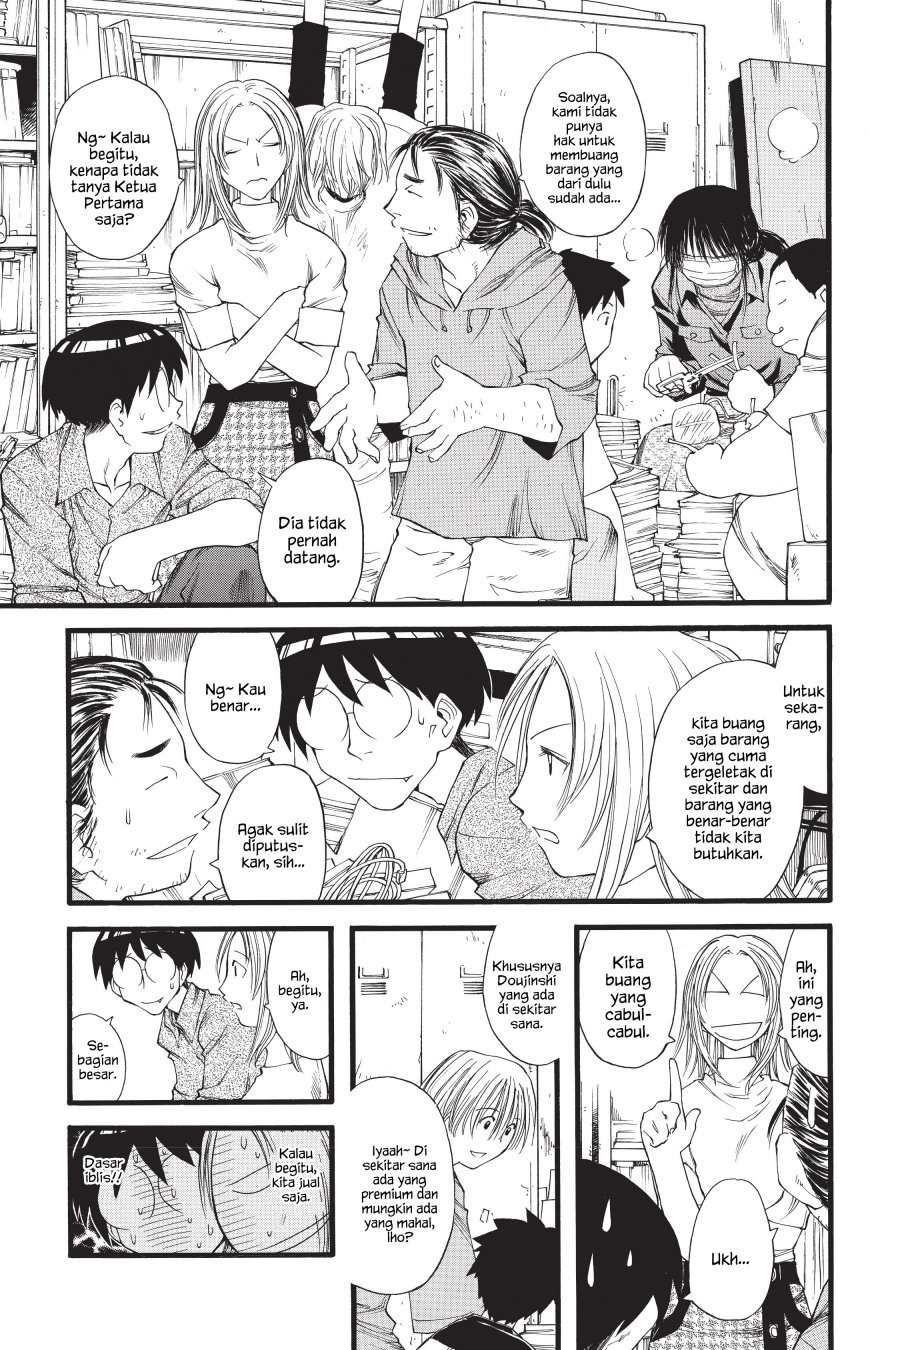 Genshiken – The Society For The Study Of Modern Visual Culture Chapter 18 - 181